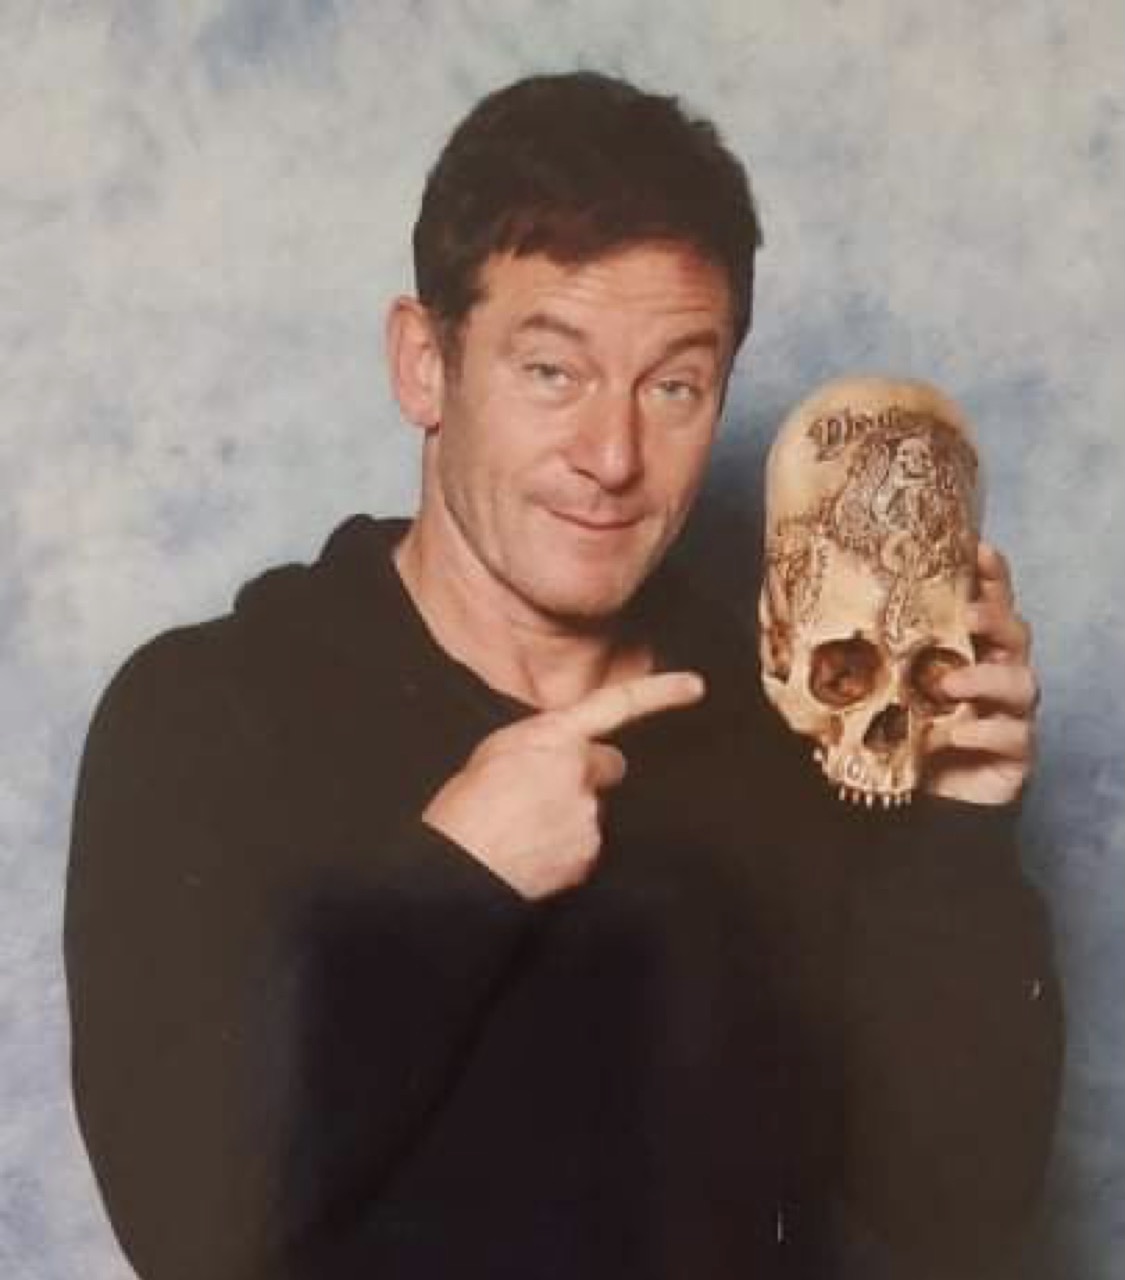 Call The Top Alternative Artist For Human Skull Carving Popular With Celebrities